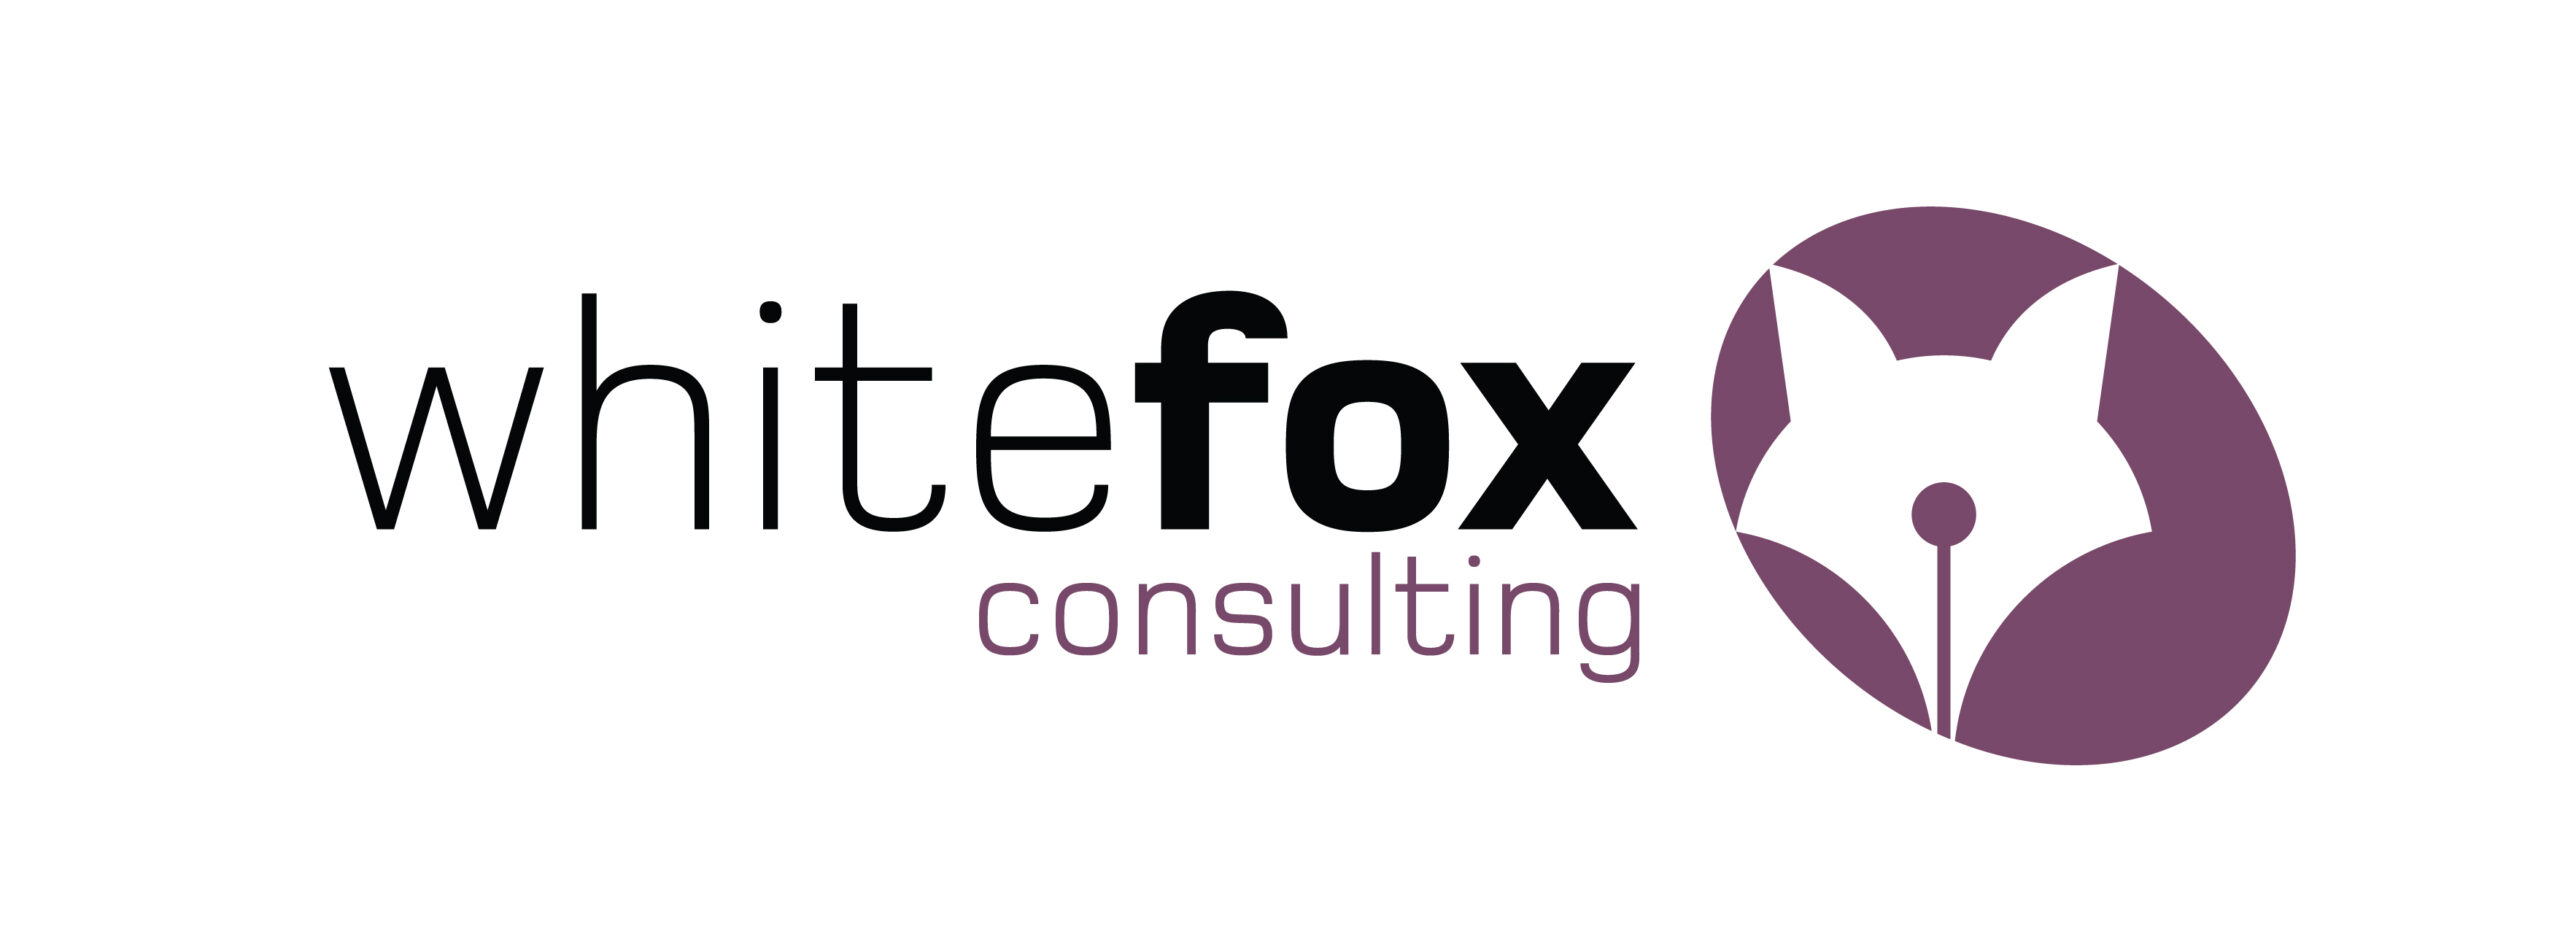 The WhiteFox Group